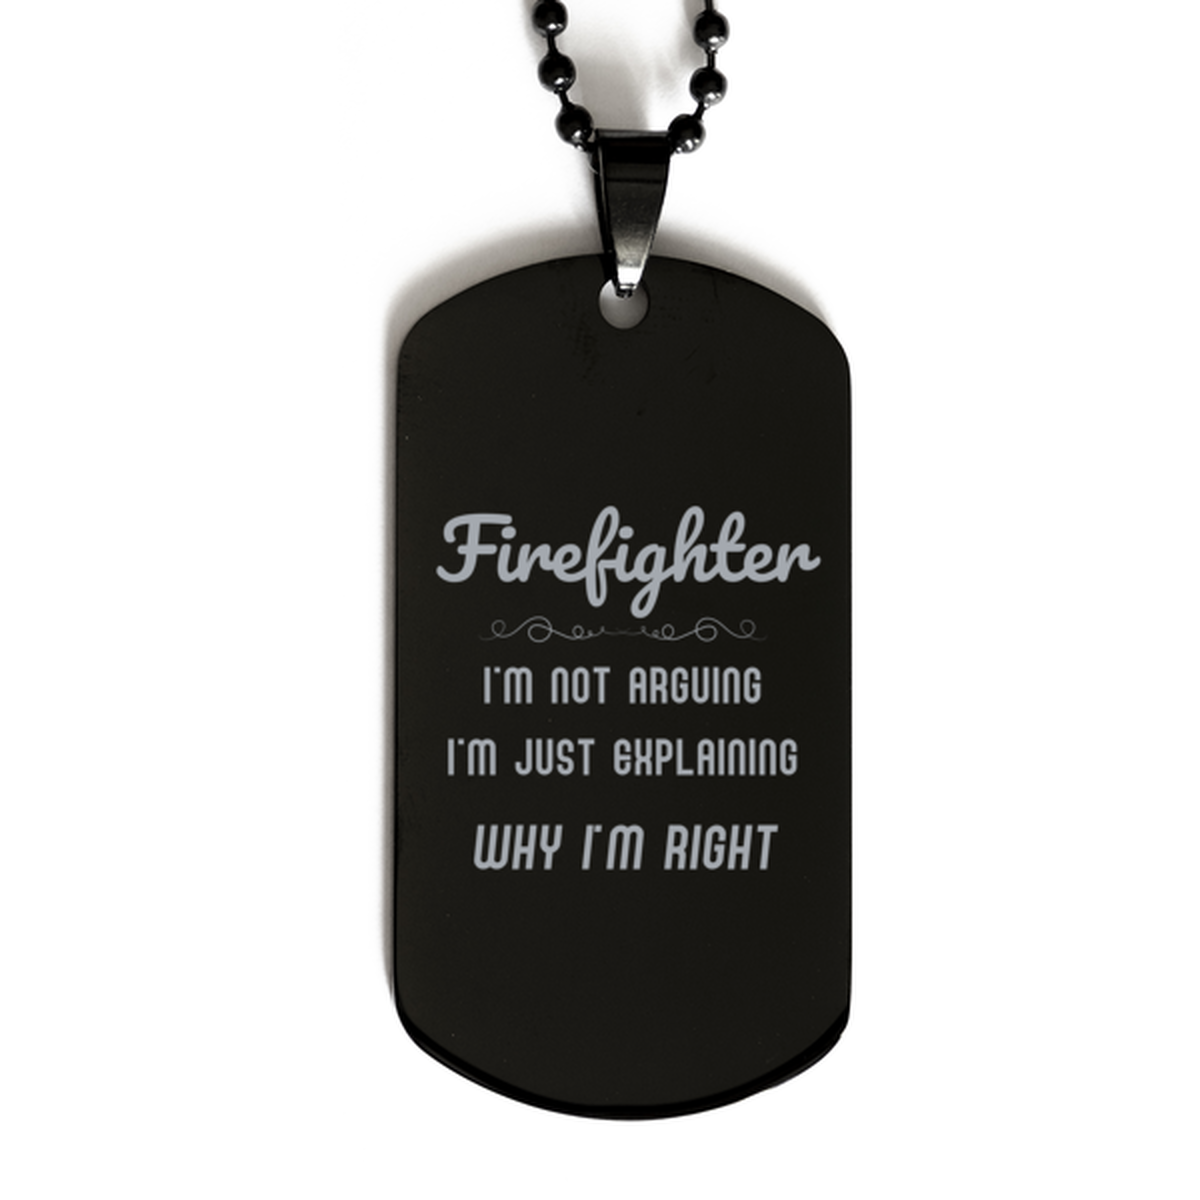 Firefighter I'm not Arguing. I'm Just Explaining Why I'm RIGHT Black Dog Tag, Funny Saying Quote Firefighter Gifts For Firefighter Graduation Birthday Christmas Gifts for Men Women Coworker